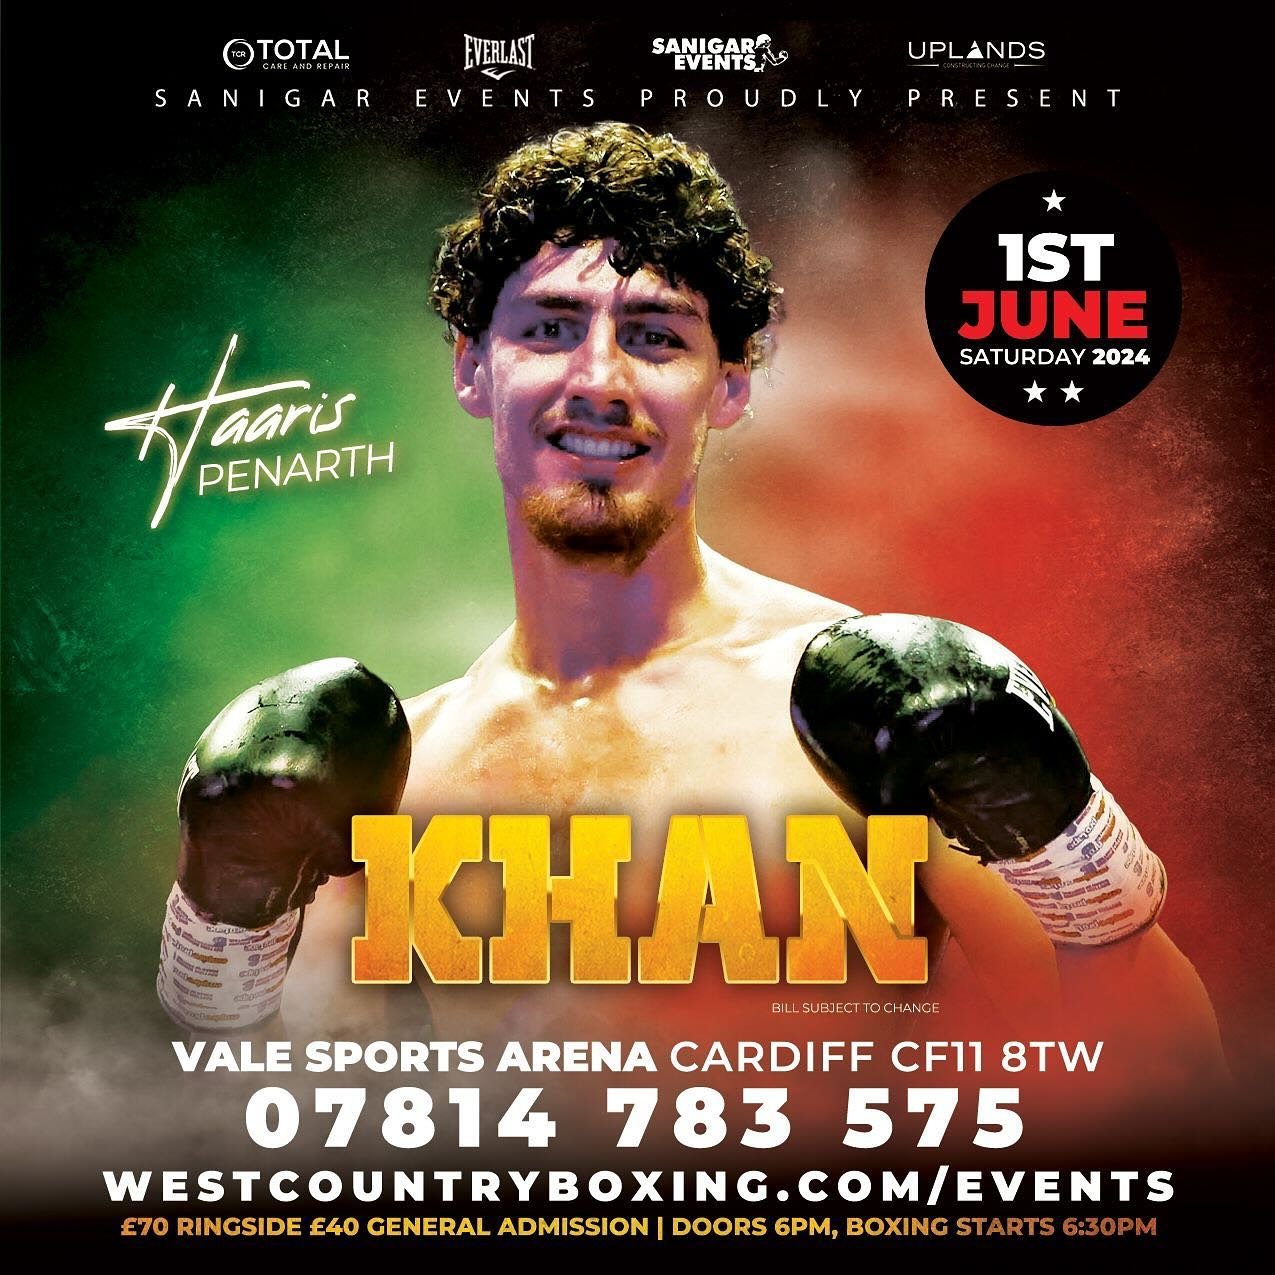 🚨 𝐉𝐔𝐍𝐄 𝟏𝐬𝐭 𝐔𝐍𝐃𝐄𝐑𝐂𝐀𝐑𝐃 𝐍𝐄𝐖𝐒 🚨

We are excited to share even more undercard news ahead of our massive show in Cardiff on Saturday 1st June, topped with the highly anticipated Welsh title showdown between Ryan Pocock and Ethan Georg